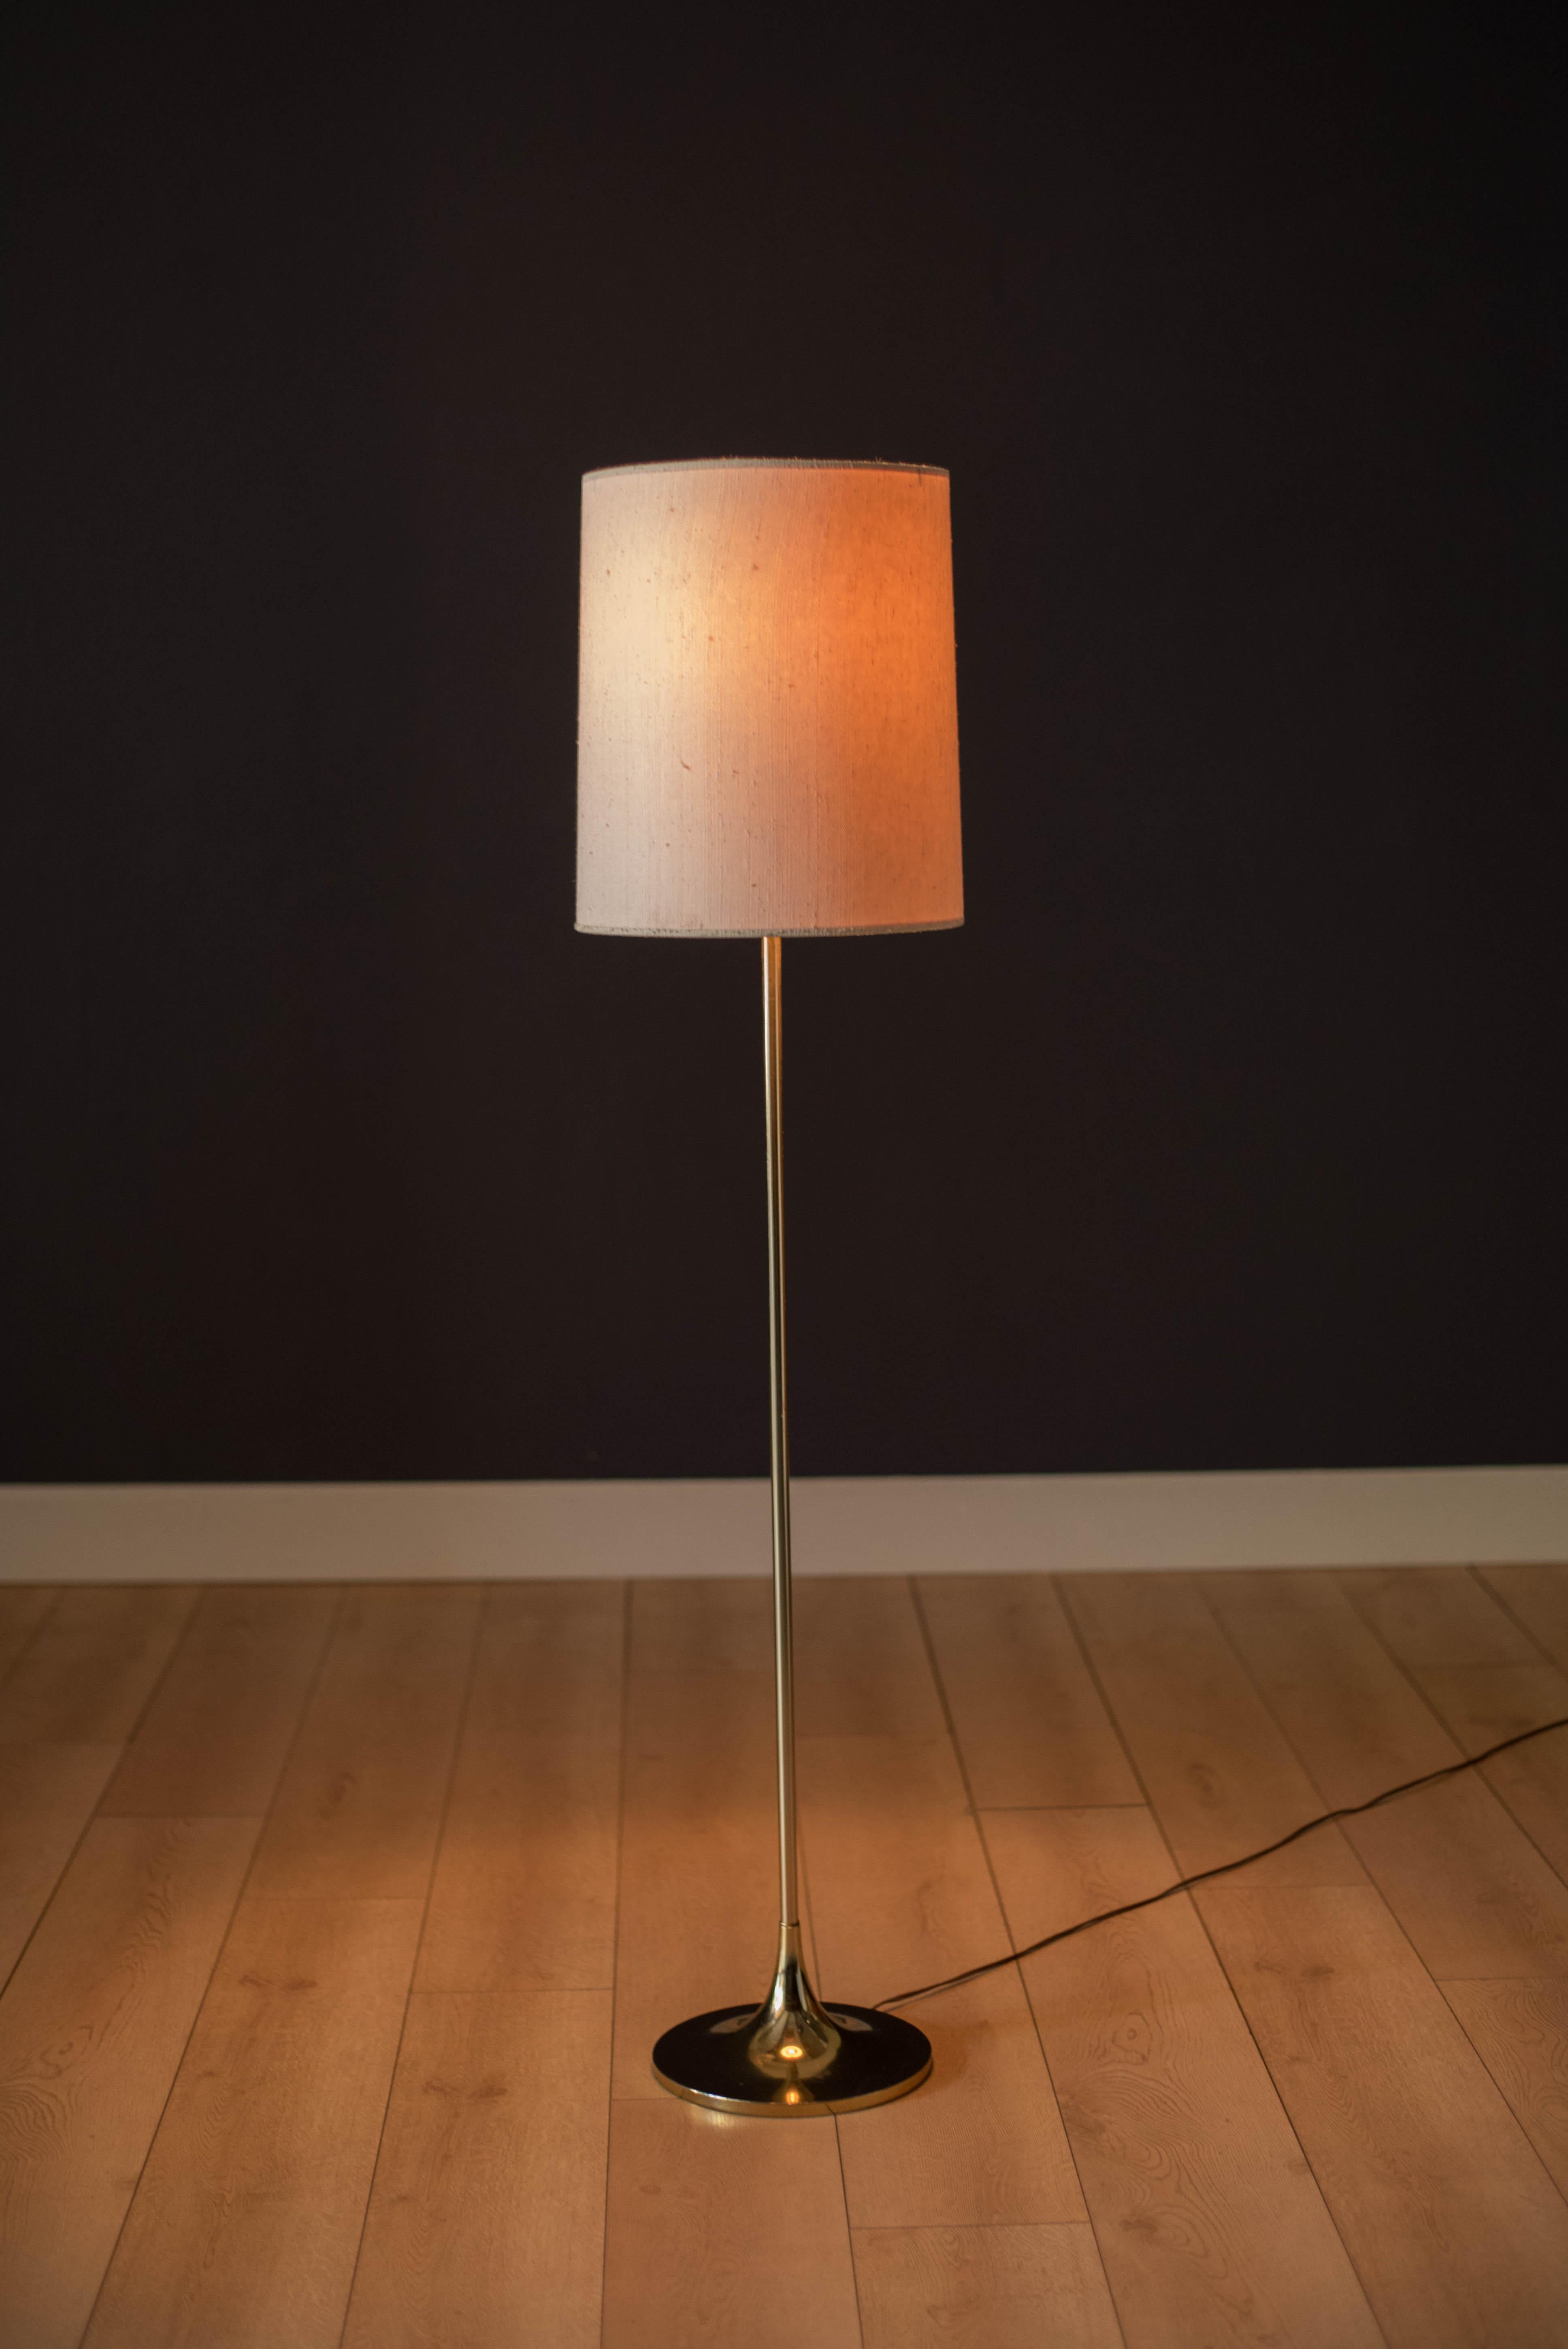 Mid-Century Modern Laurel floor lamp, circa 1960s. This sculptural piece features a weighted brass plated stem complete with Laurel lamp's signature finial. Includes a three-way switch mechanism. Drum shade is not included.